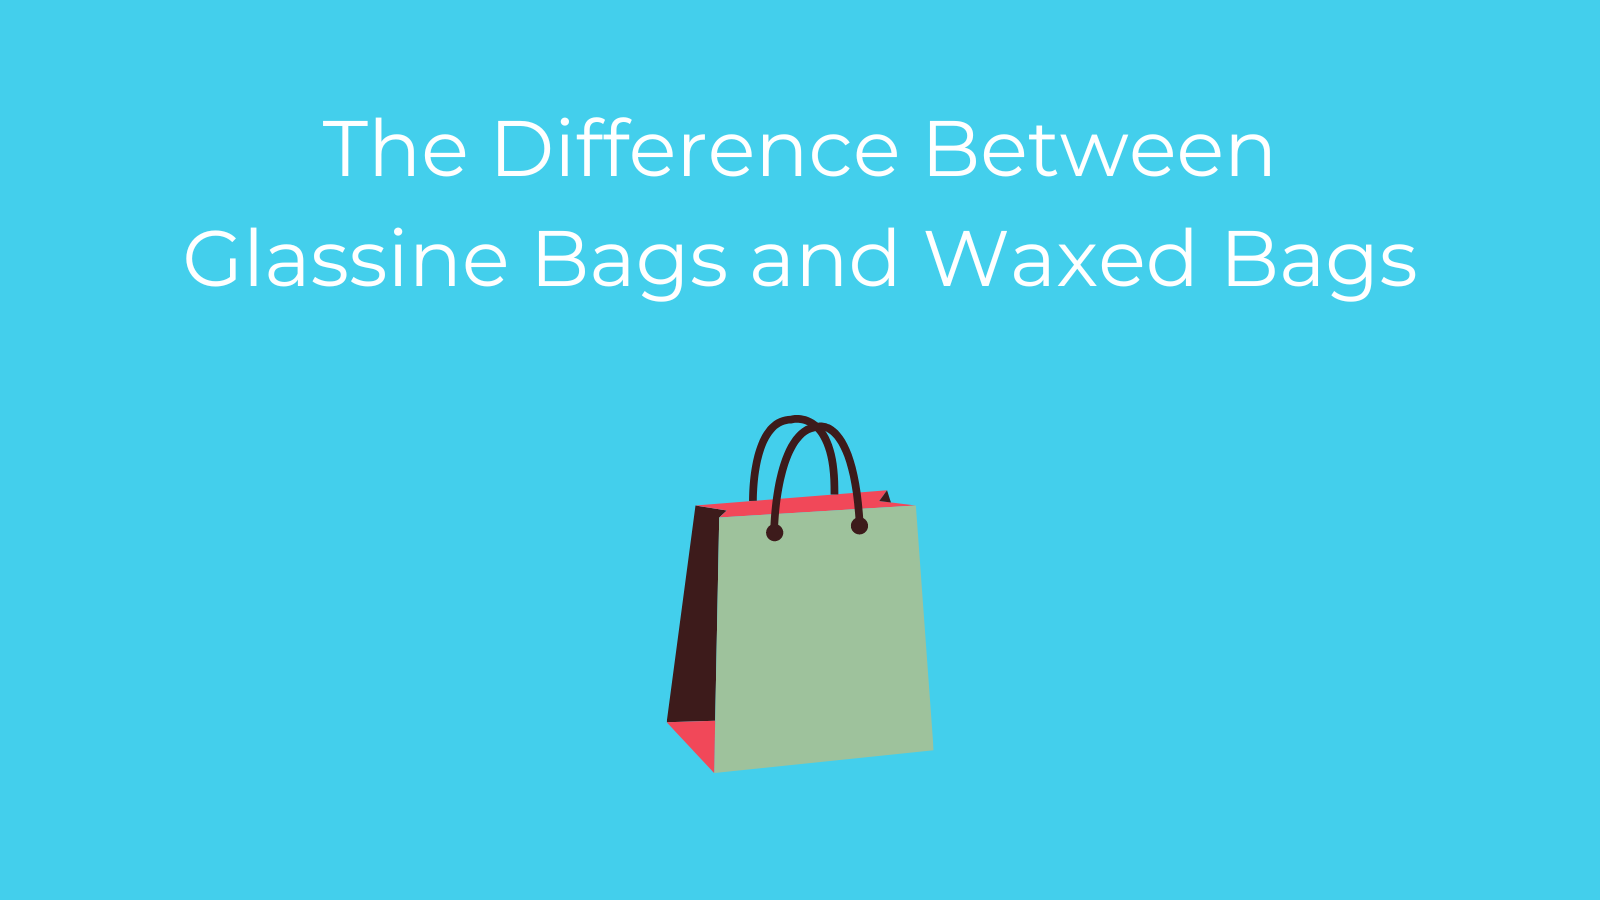 https://globalowls.com/wp-content/uploads/2022/12/The-Difference-Between-Glassine-Bags-and-Waxed-Bags.png